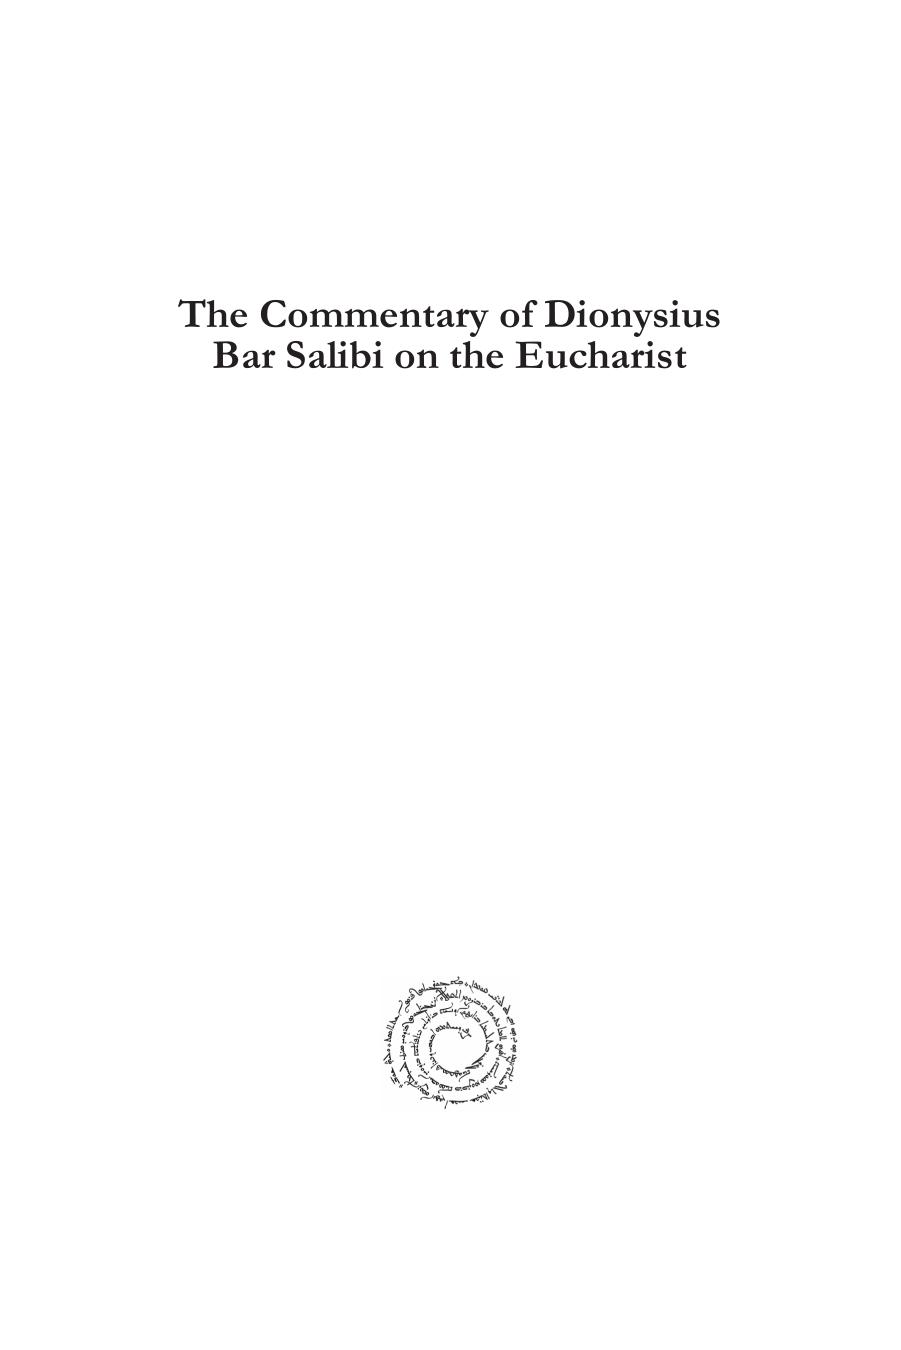 The Commentary of Dionysius Bar Salibi on the Eucharist by Pseudo-Dionysius the Areopagite